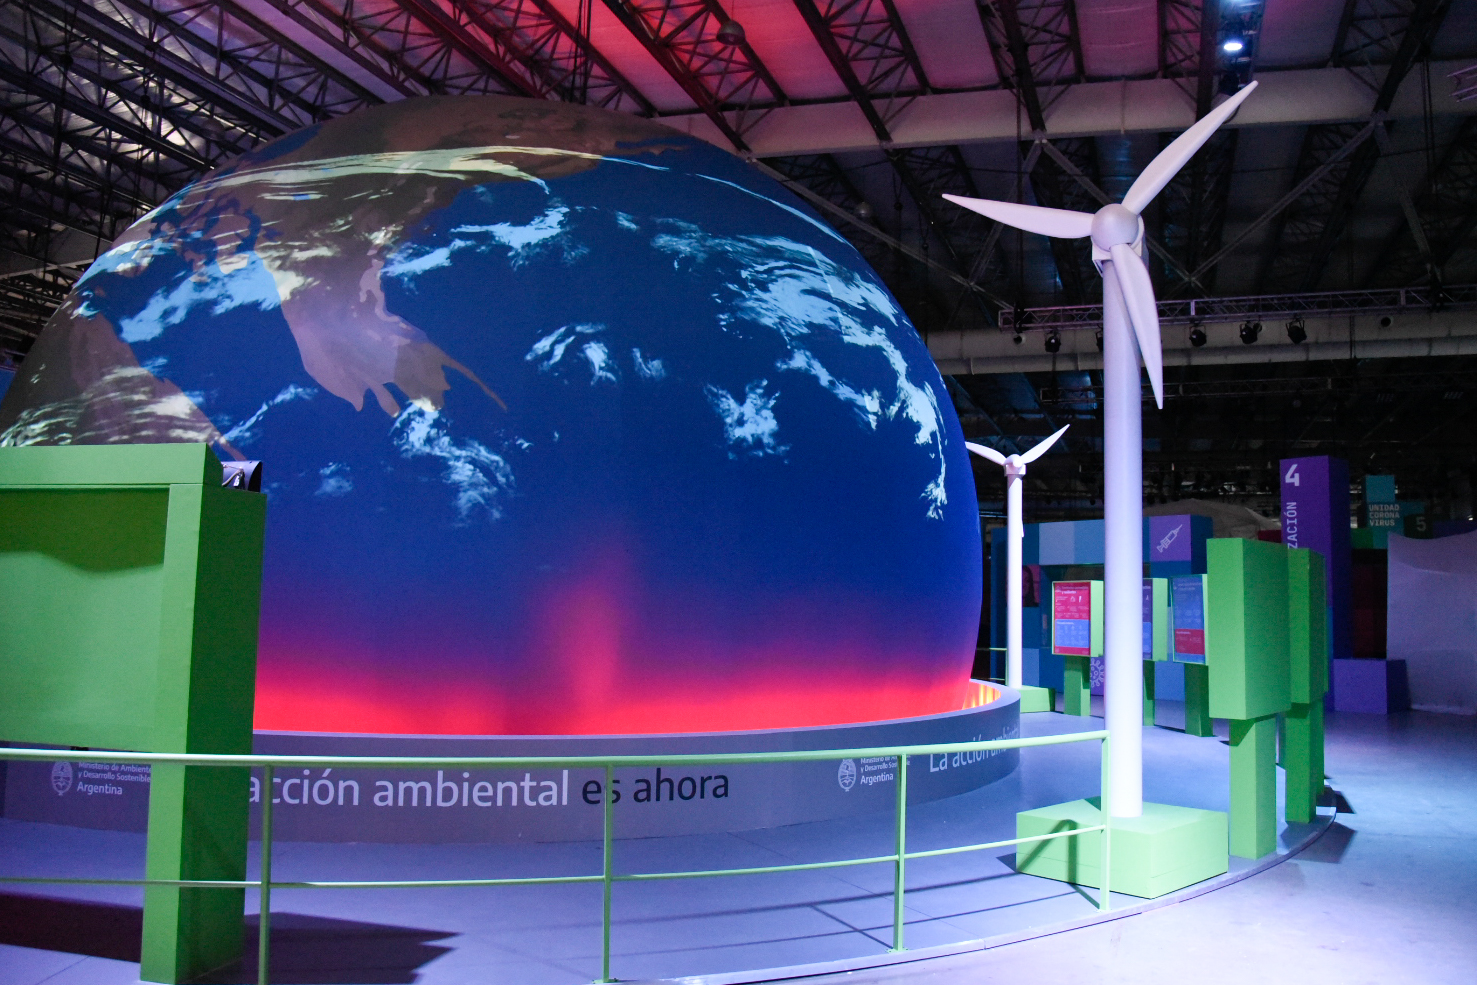 Technopolis: Ambiente will reopen climate change areas, national parks and wetlands